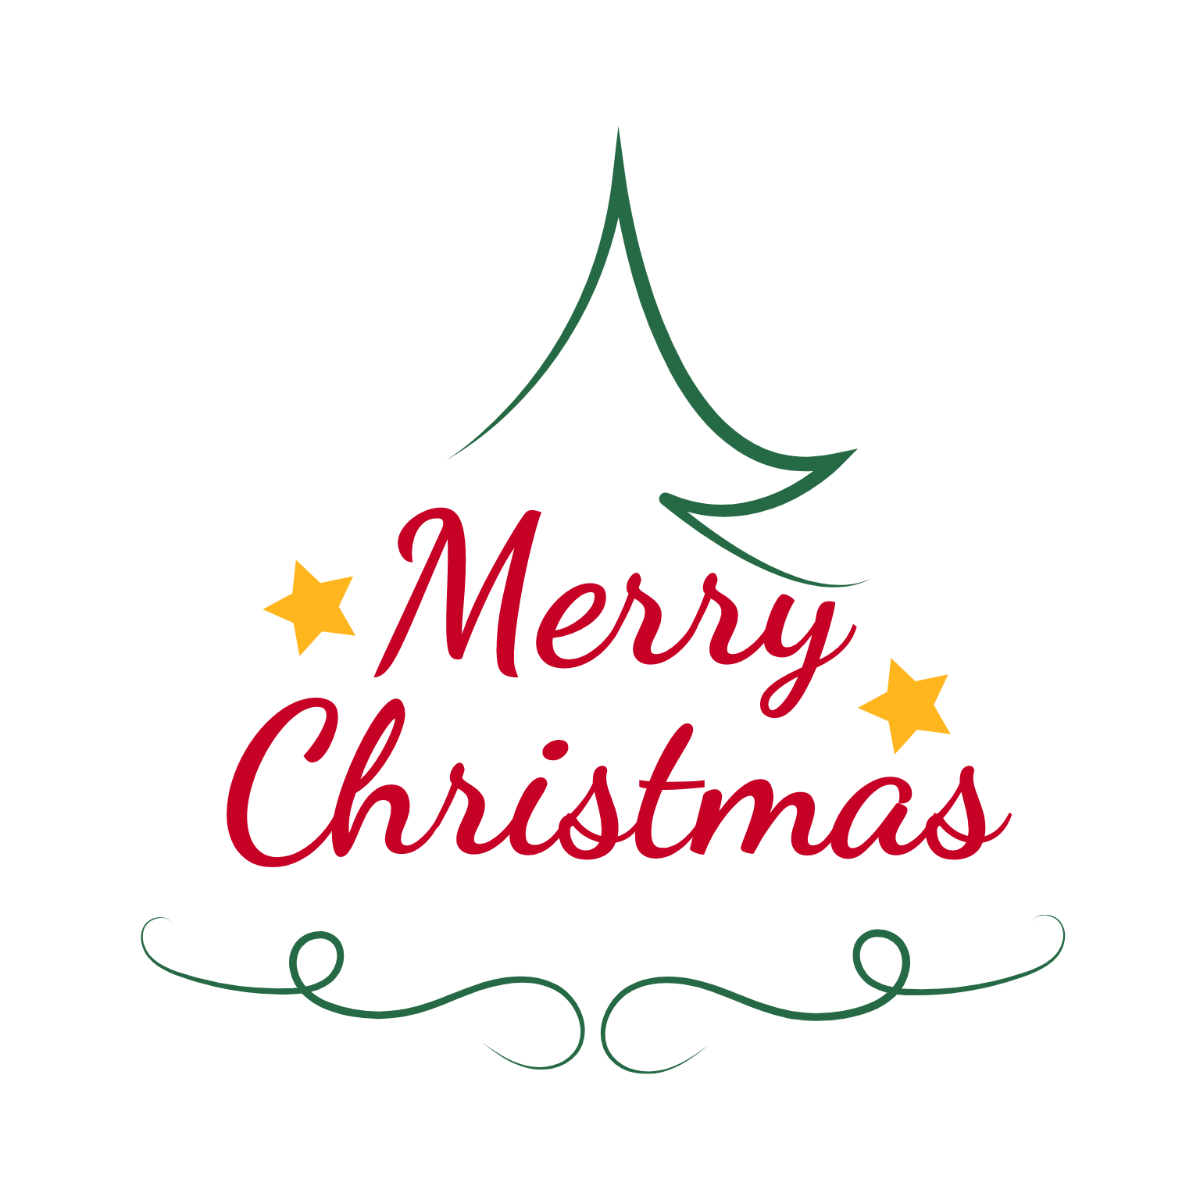 Free Merry Christmas Clip Art Template